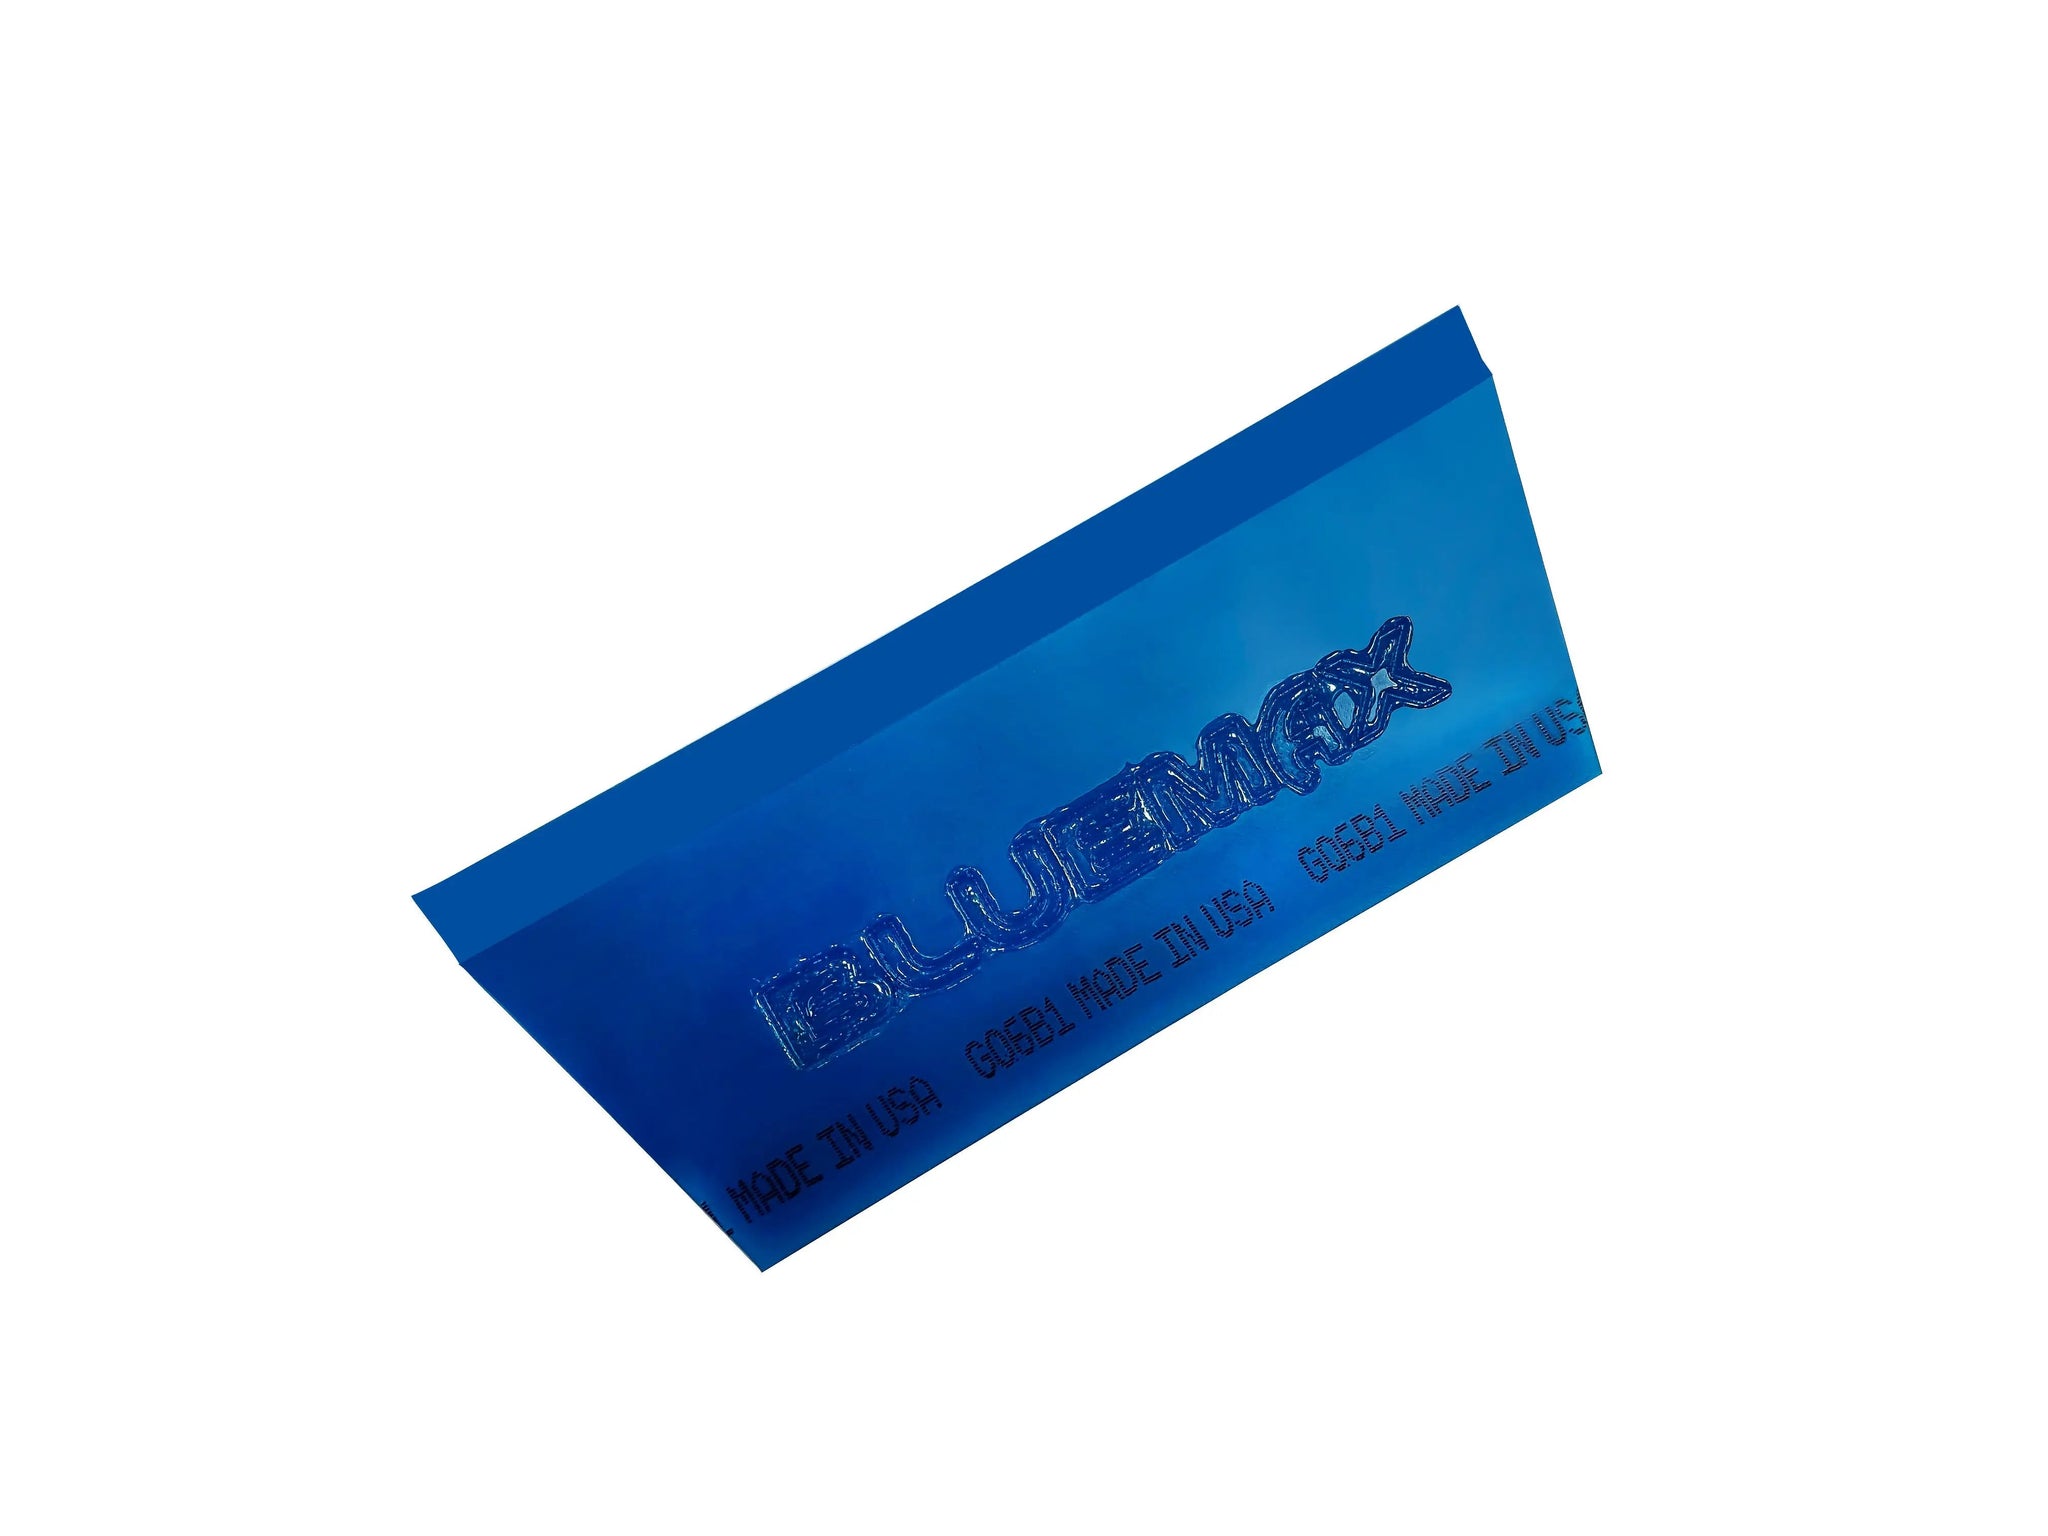 BLUE MAX 5 Cropped Squeegee Blade